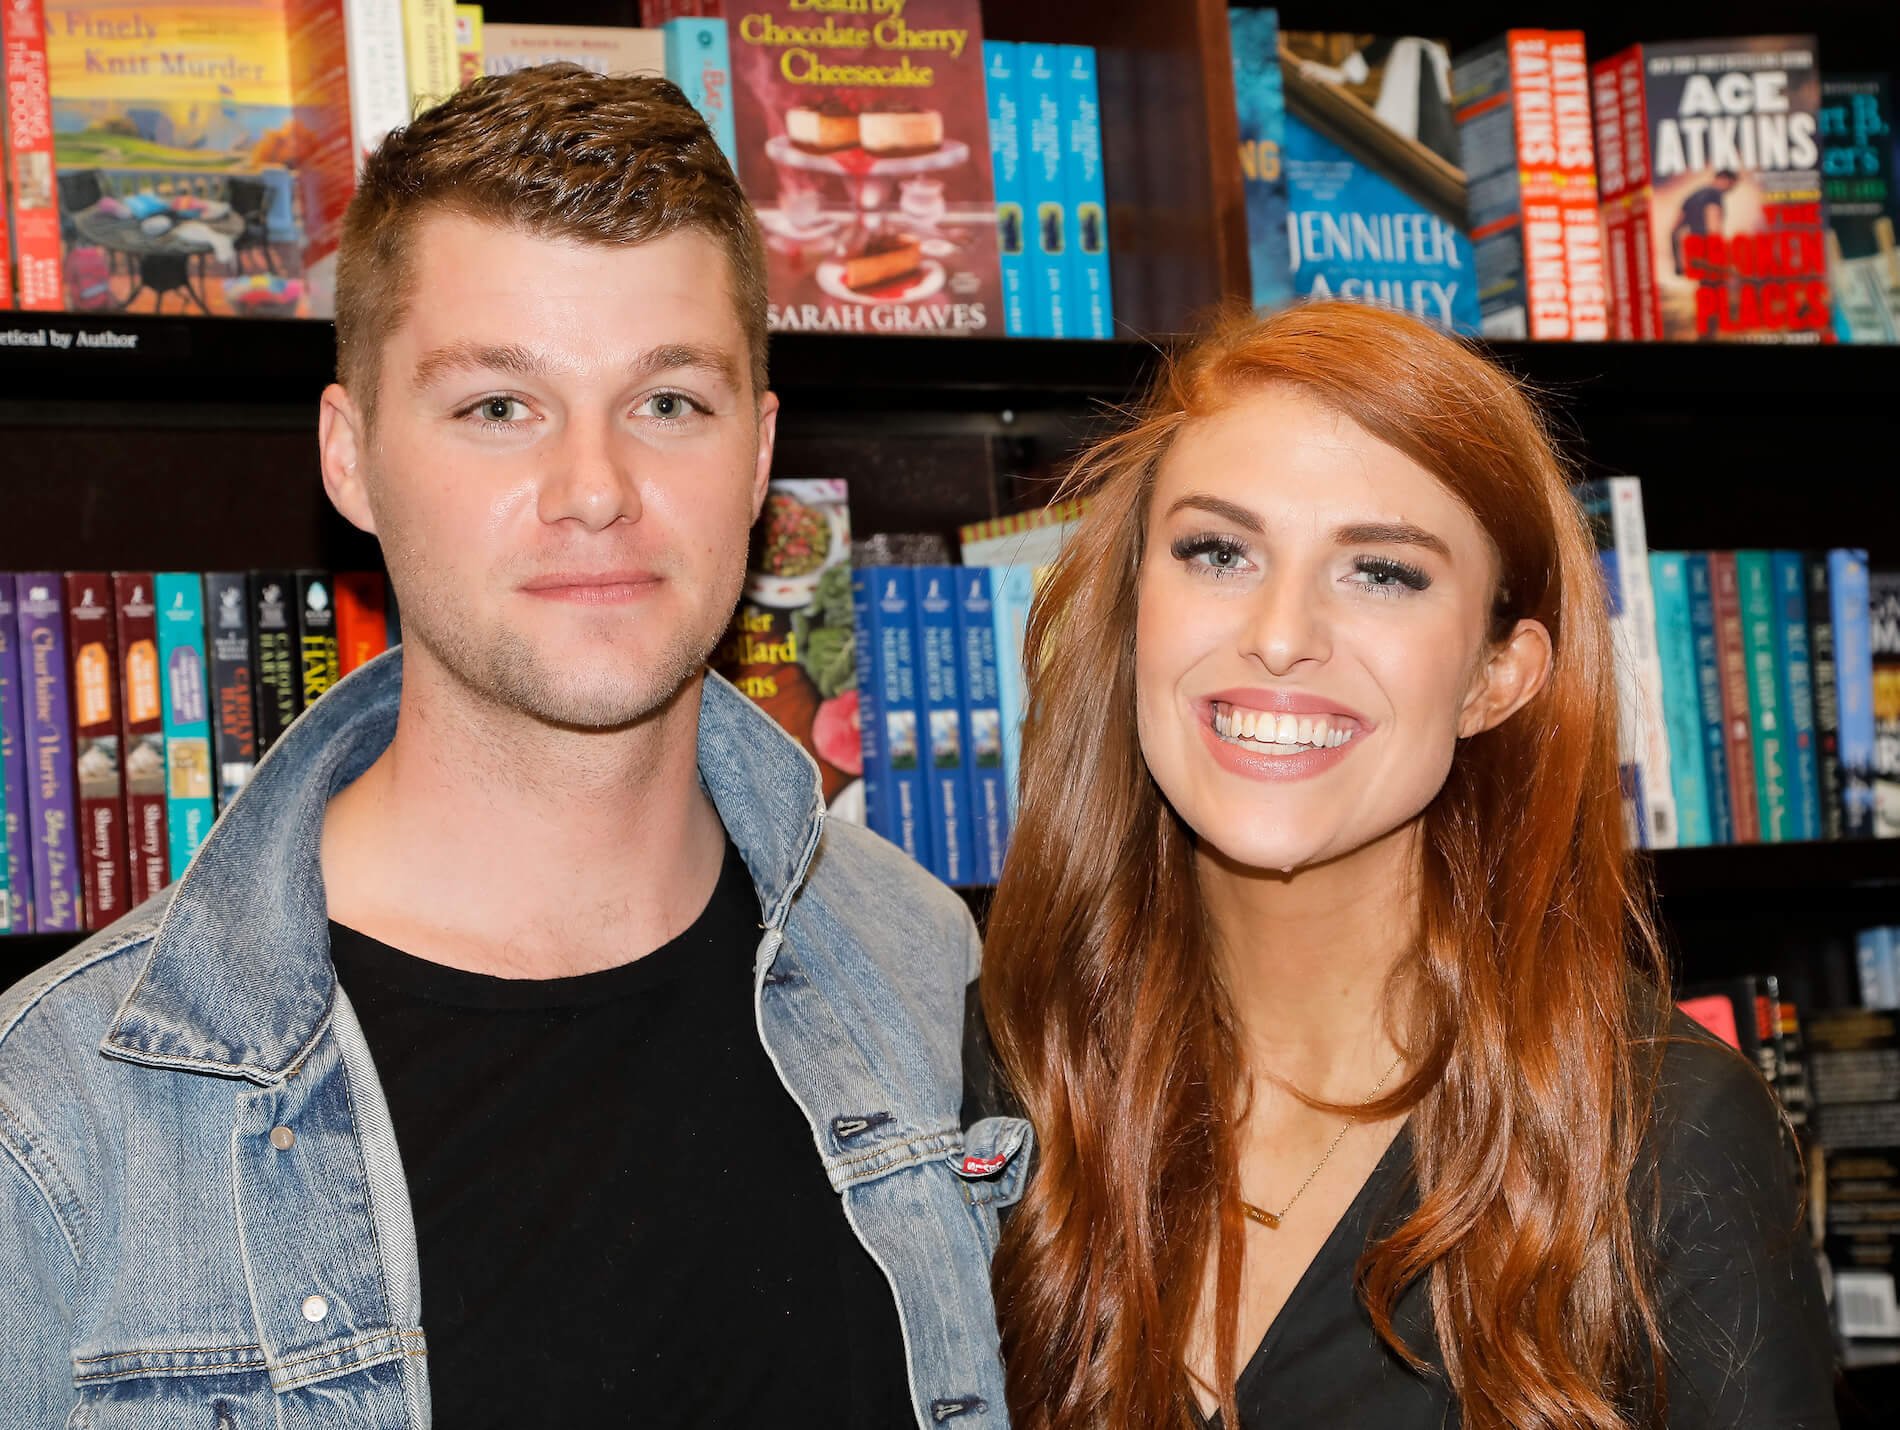 Jeremy and Audrey Roloff from 'Little People, Big World' smiling against a bookcase